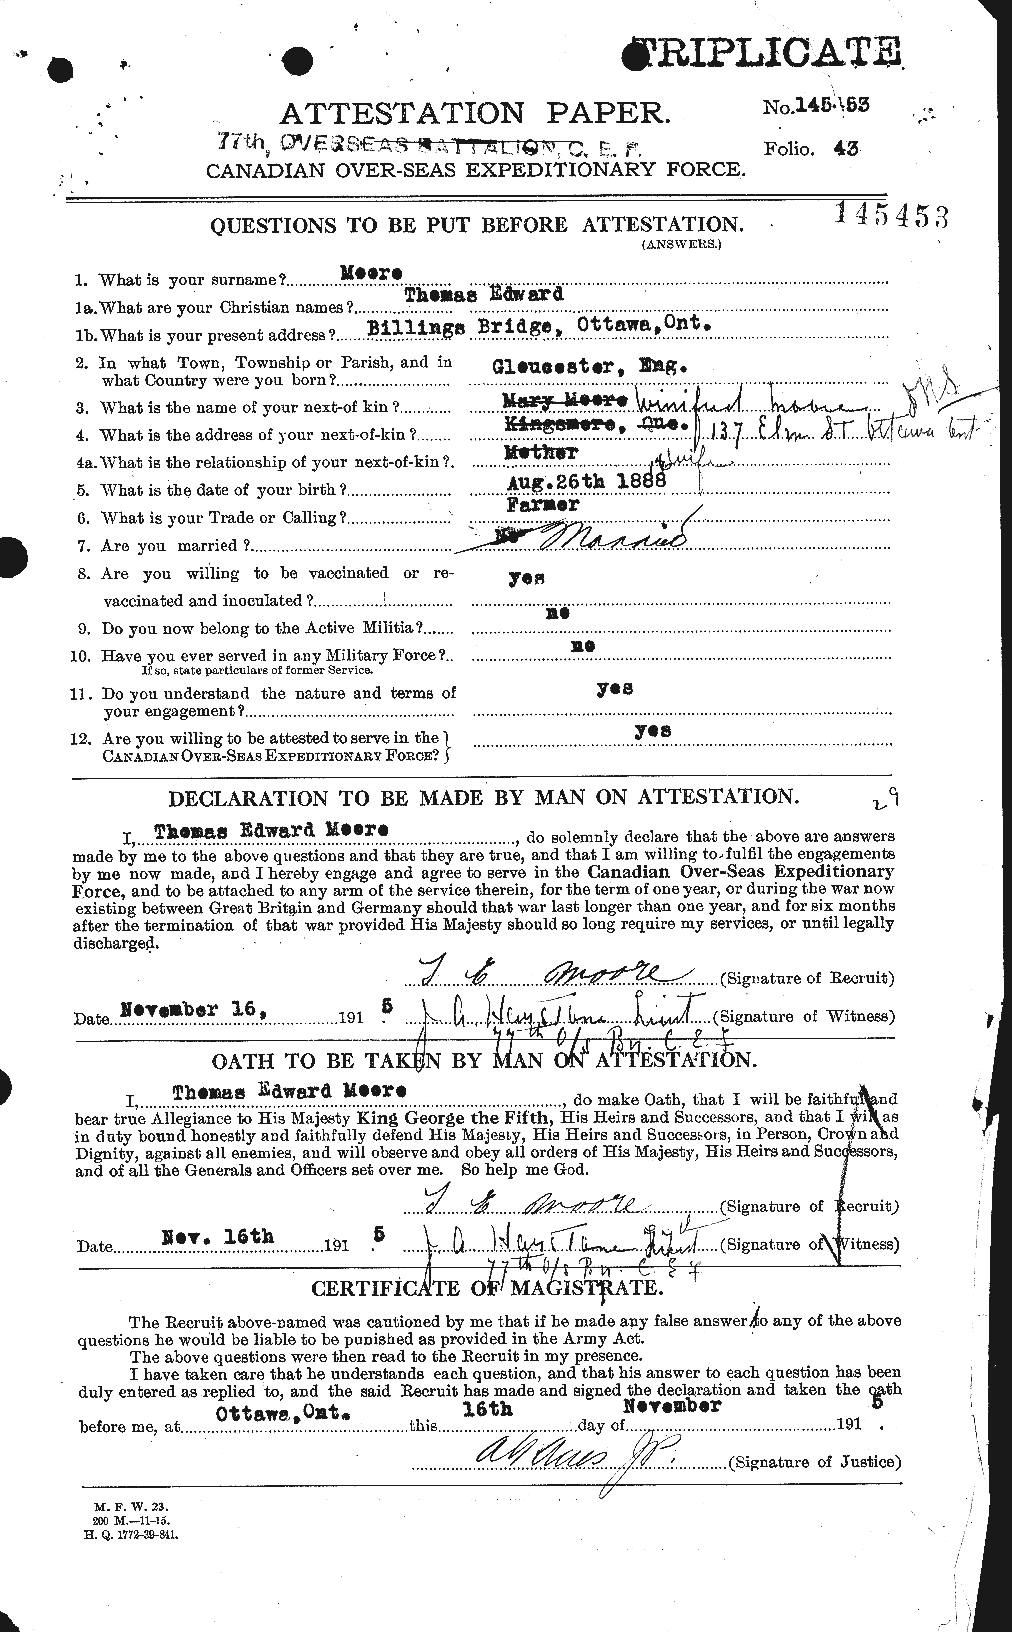 Personnel Records of the First World War - CEF 505647a